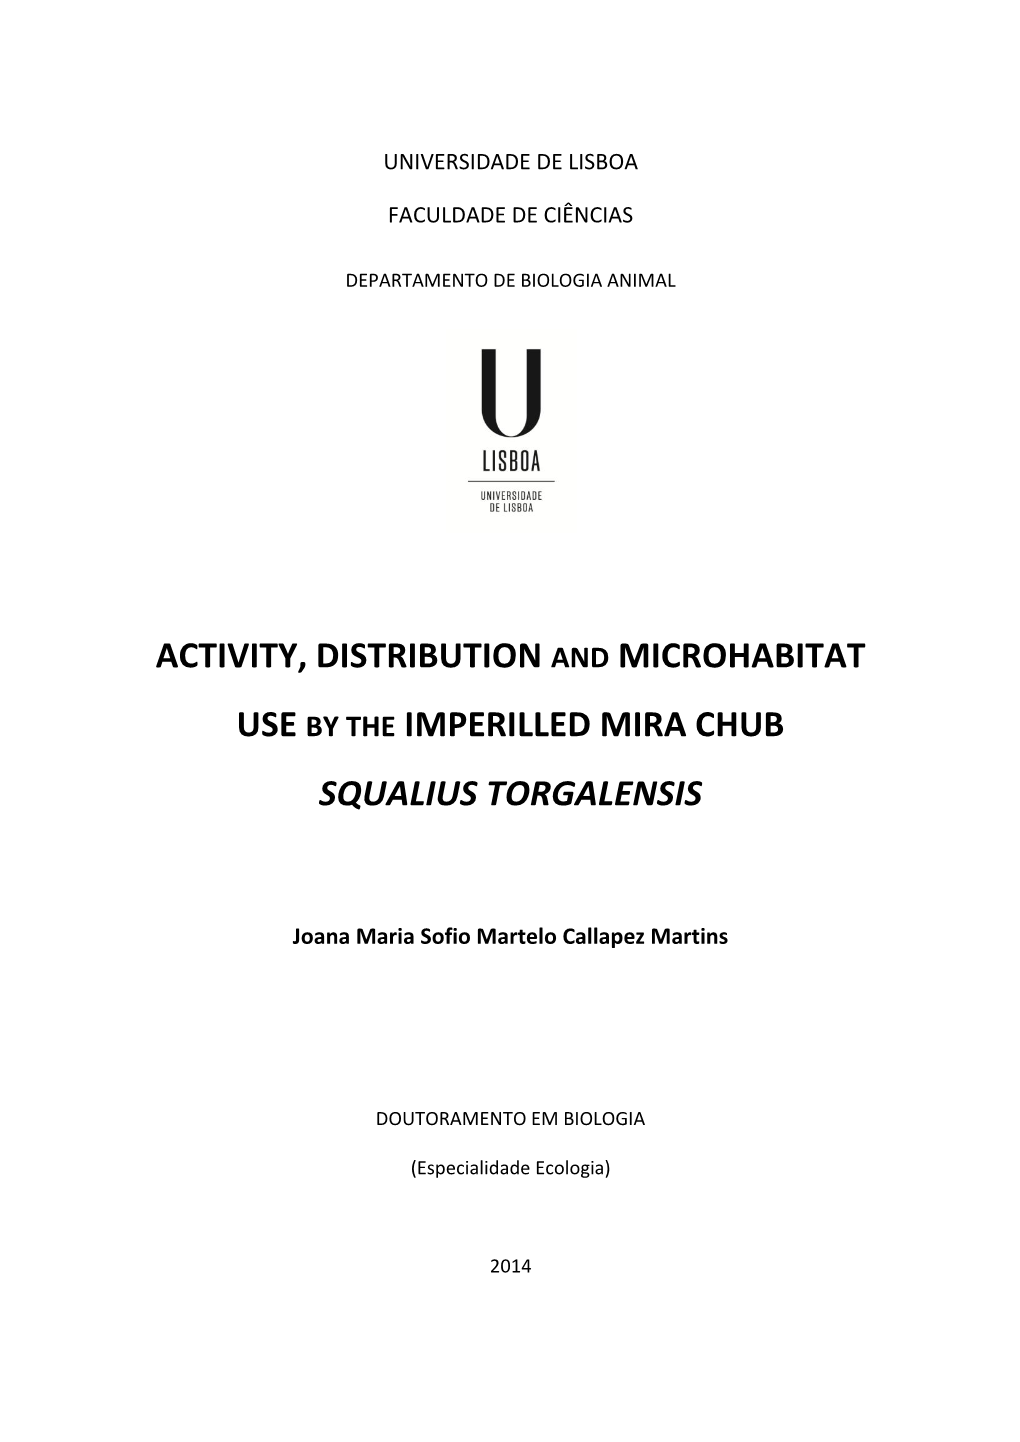 Activity, Distribution and Microhabitat Use by the Imperilled Mira Chub Squalius Torgalensis